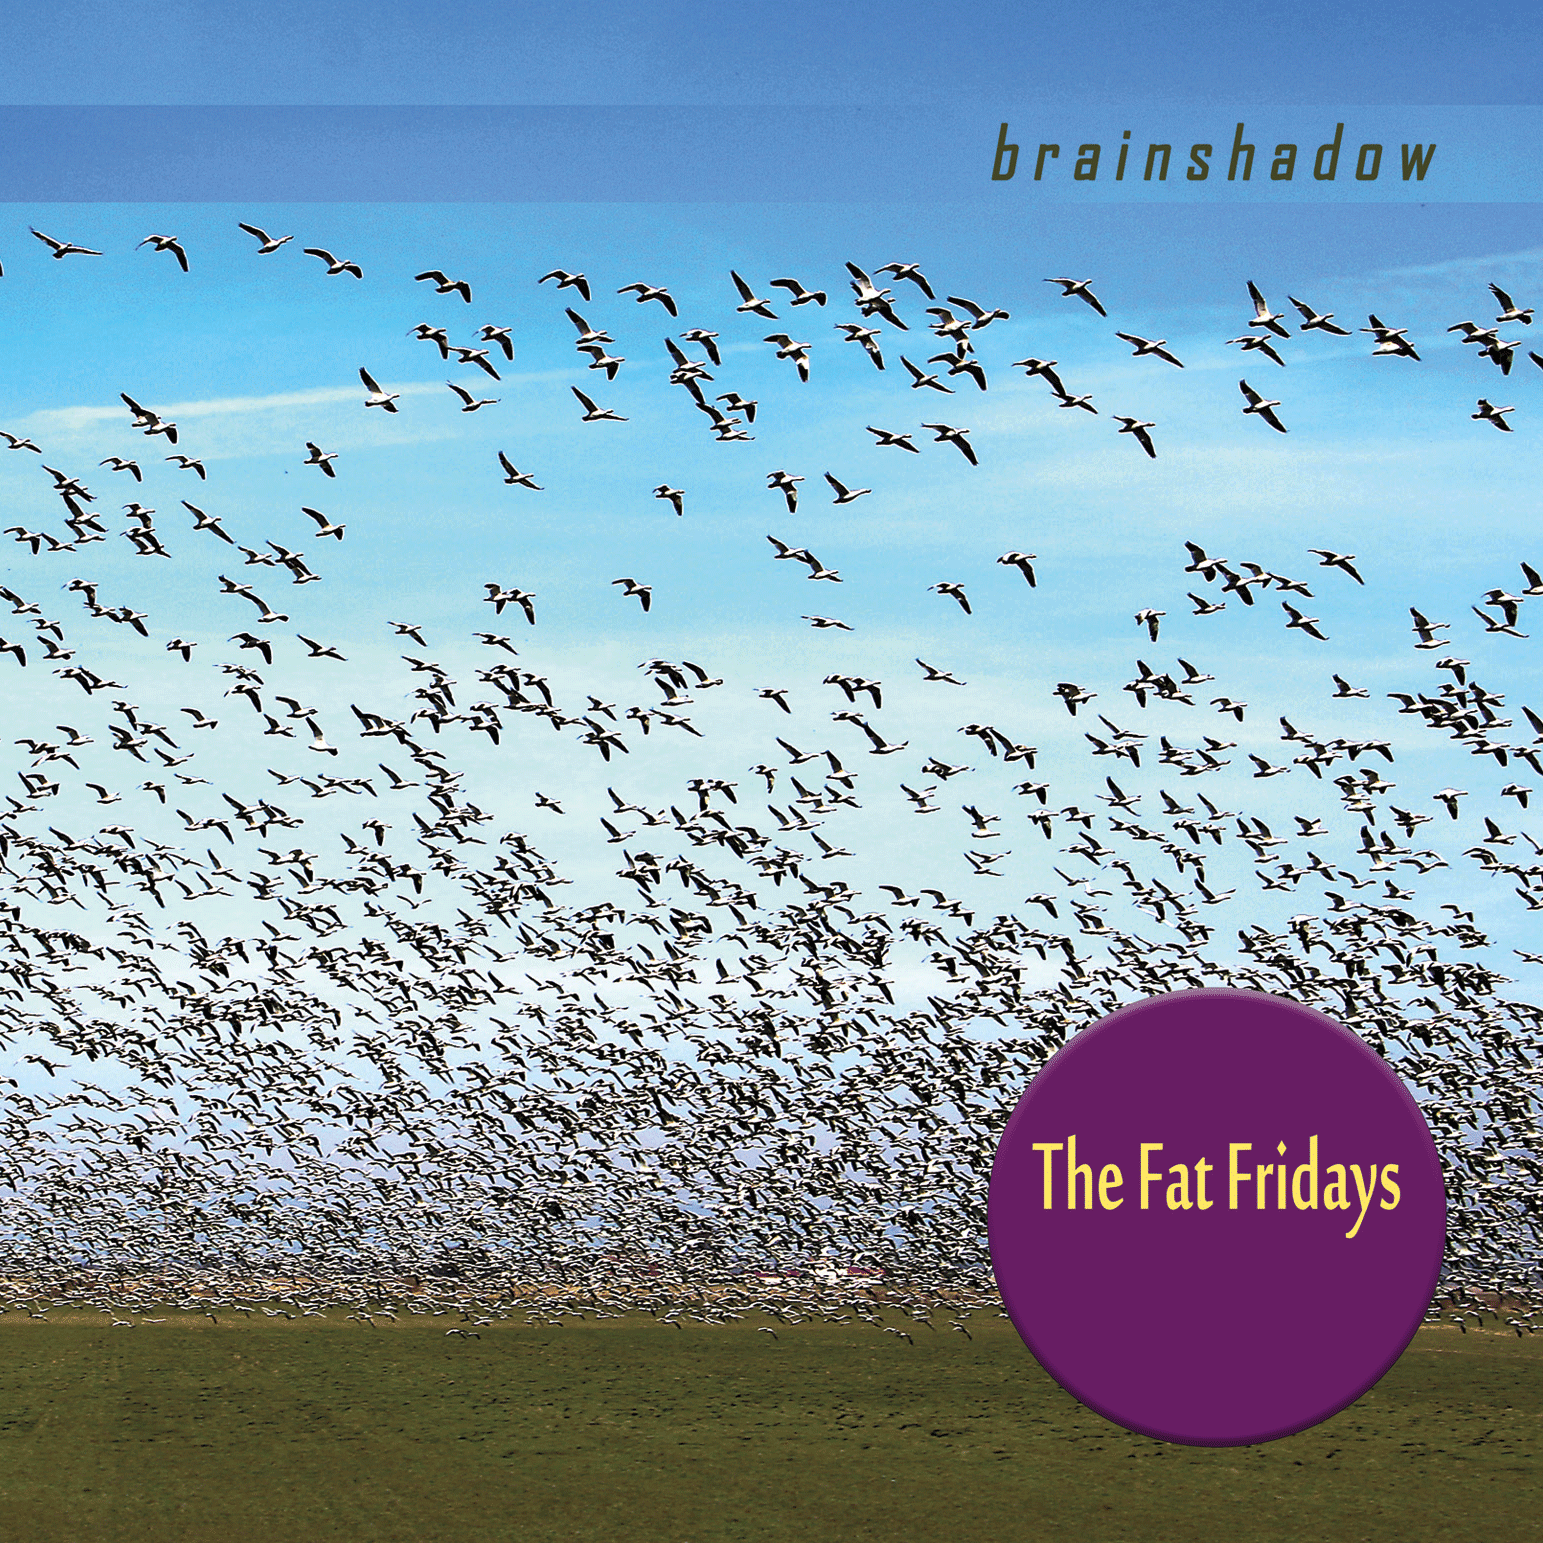 Released July 2020: The Fat Fridays CD, Brainshadow